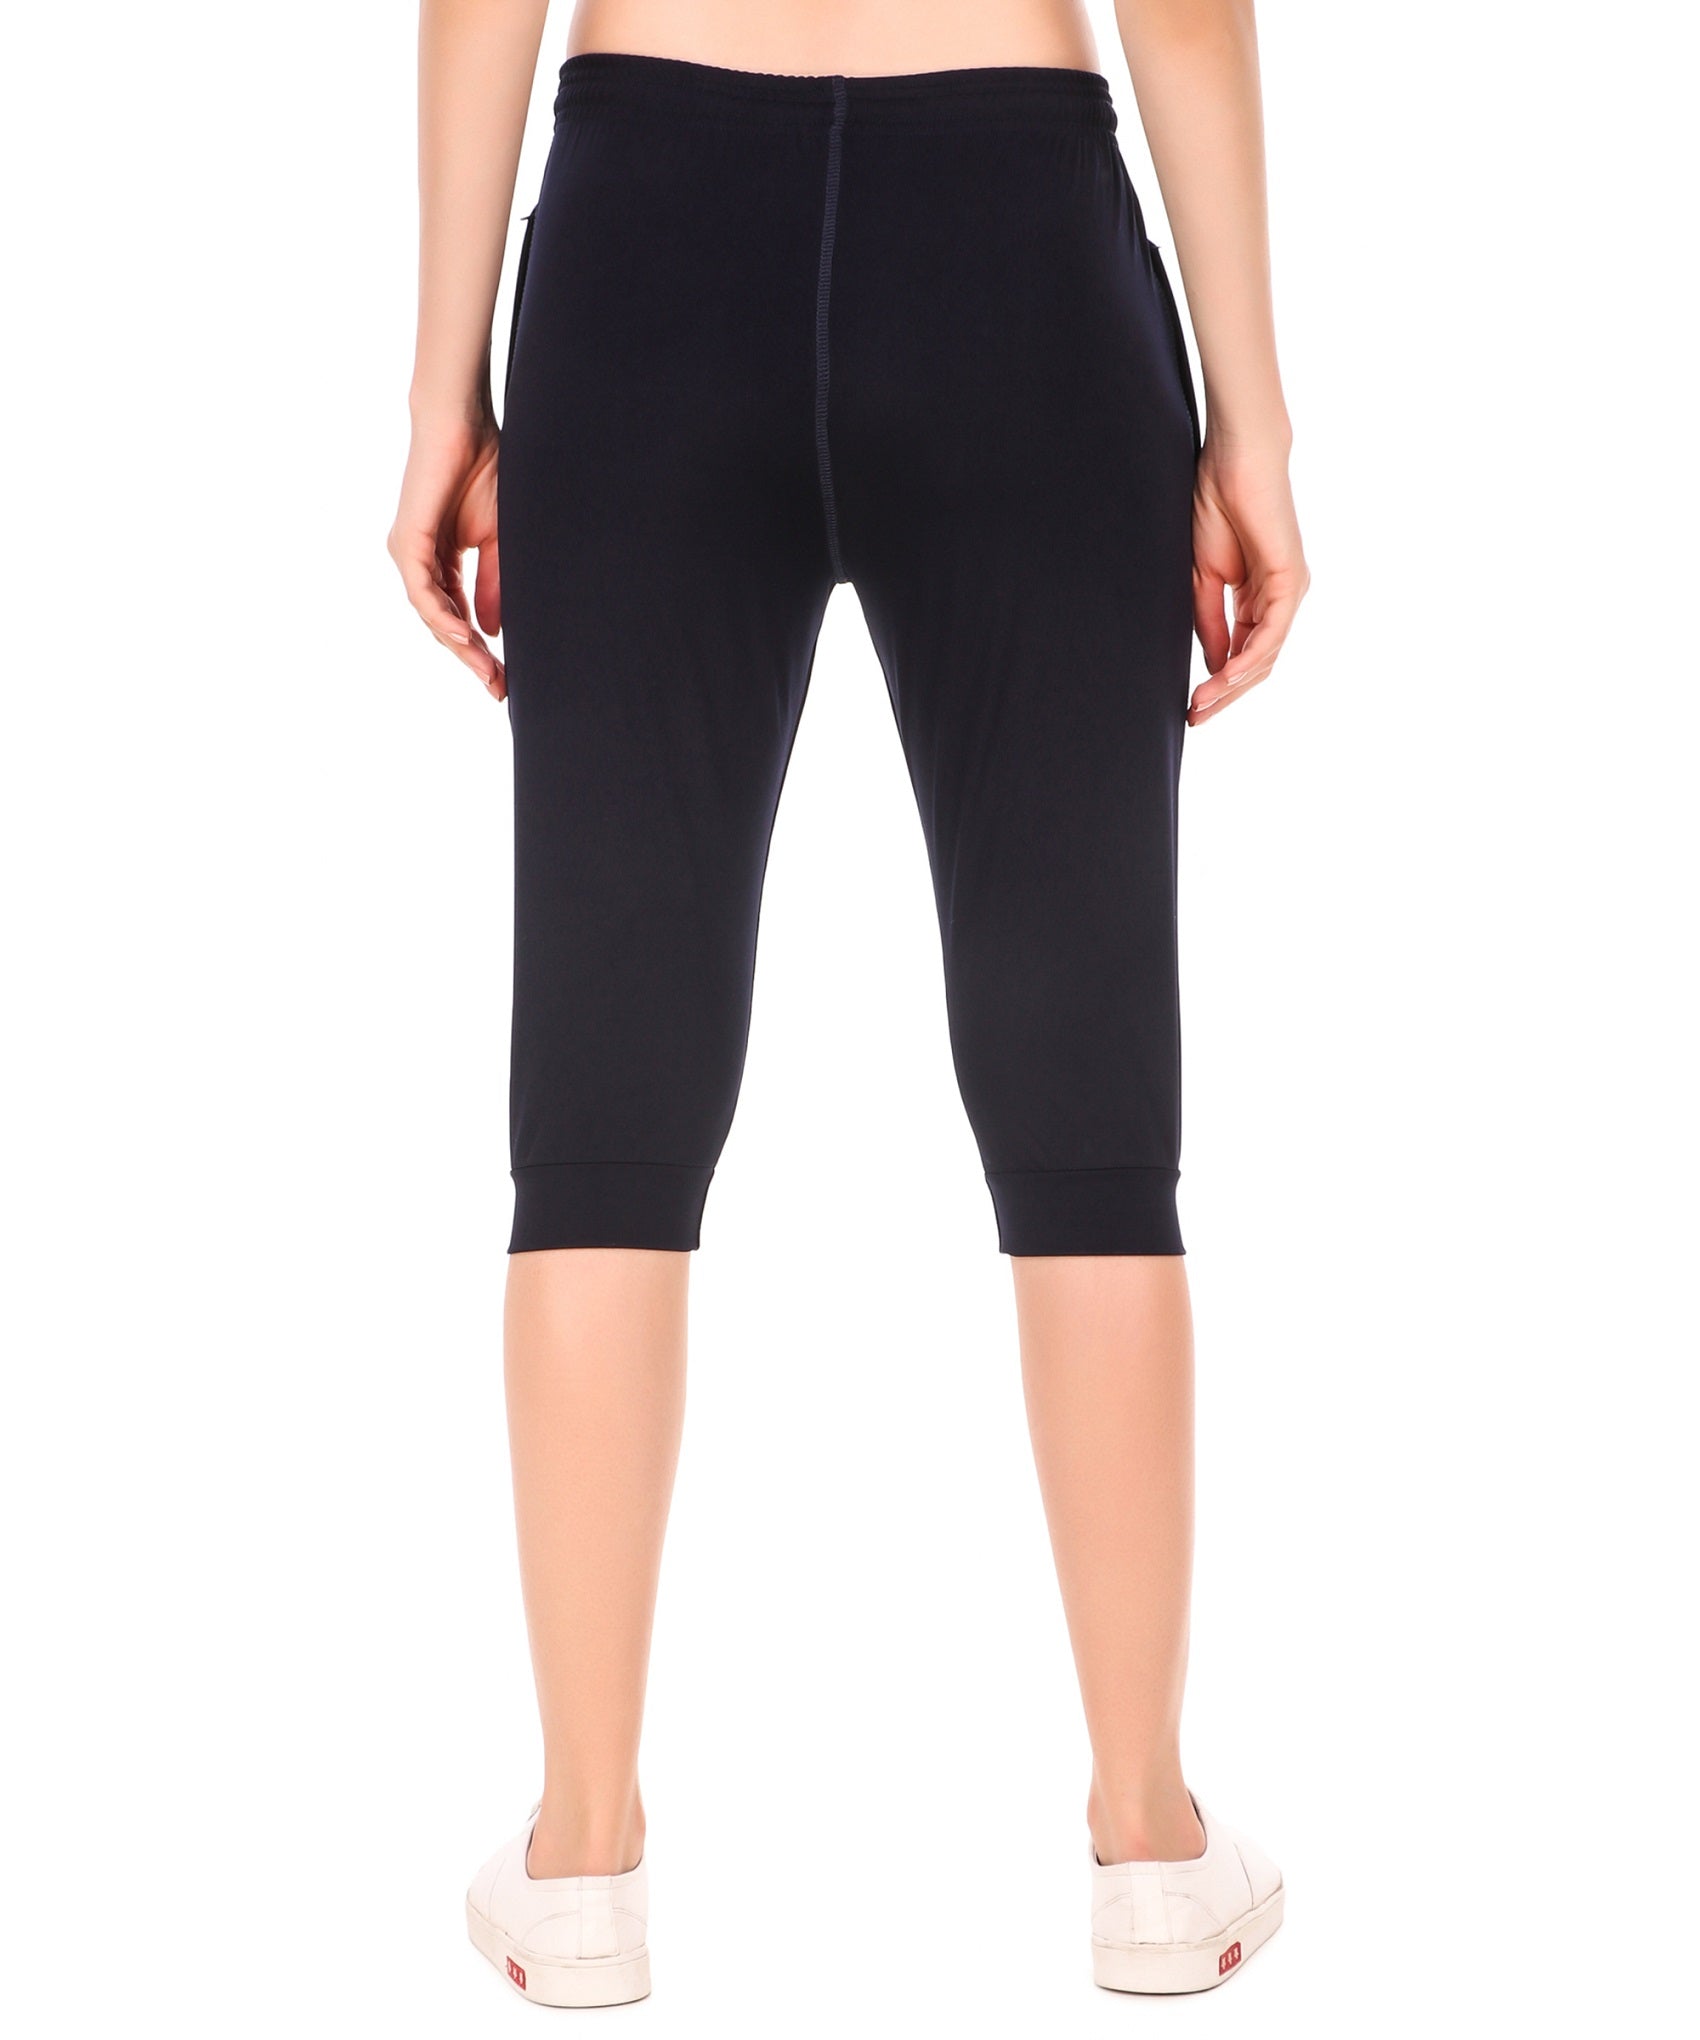 Women's Stretchable Lycra 3/4th Capri with 2 Zippered Pockets for Gym